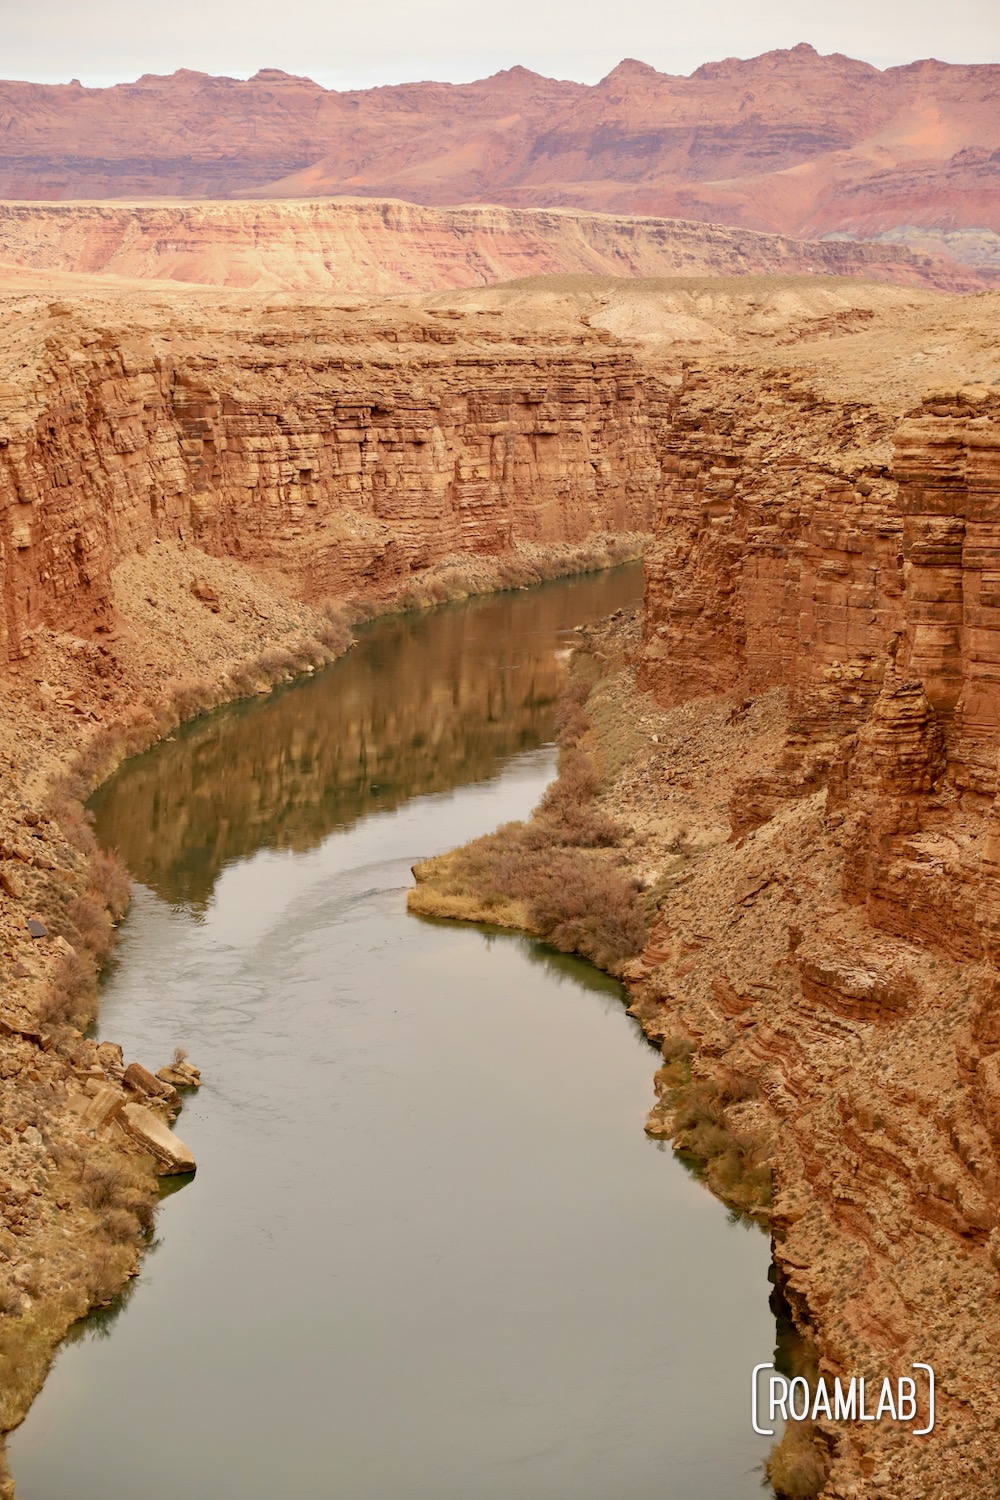 The wide Colorado river carving the cliffs of Marble Canyon.